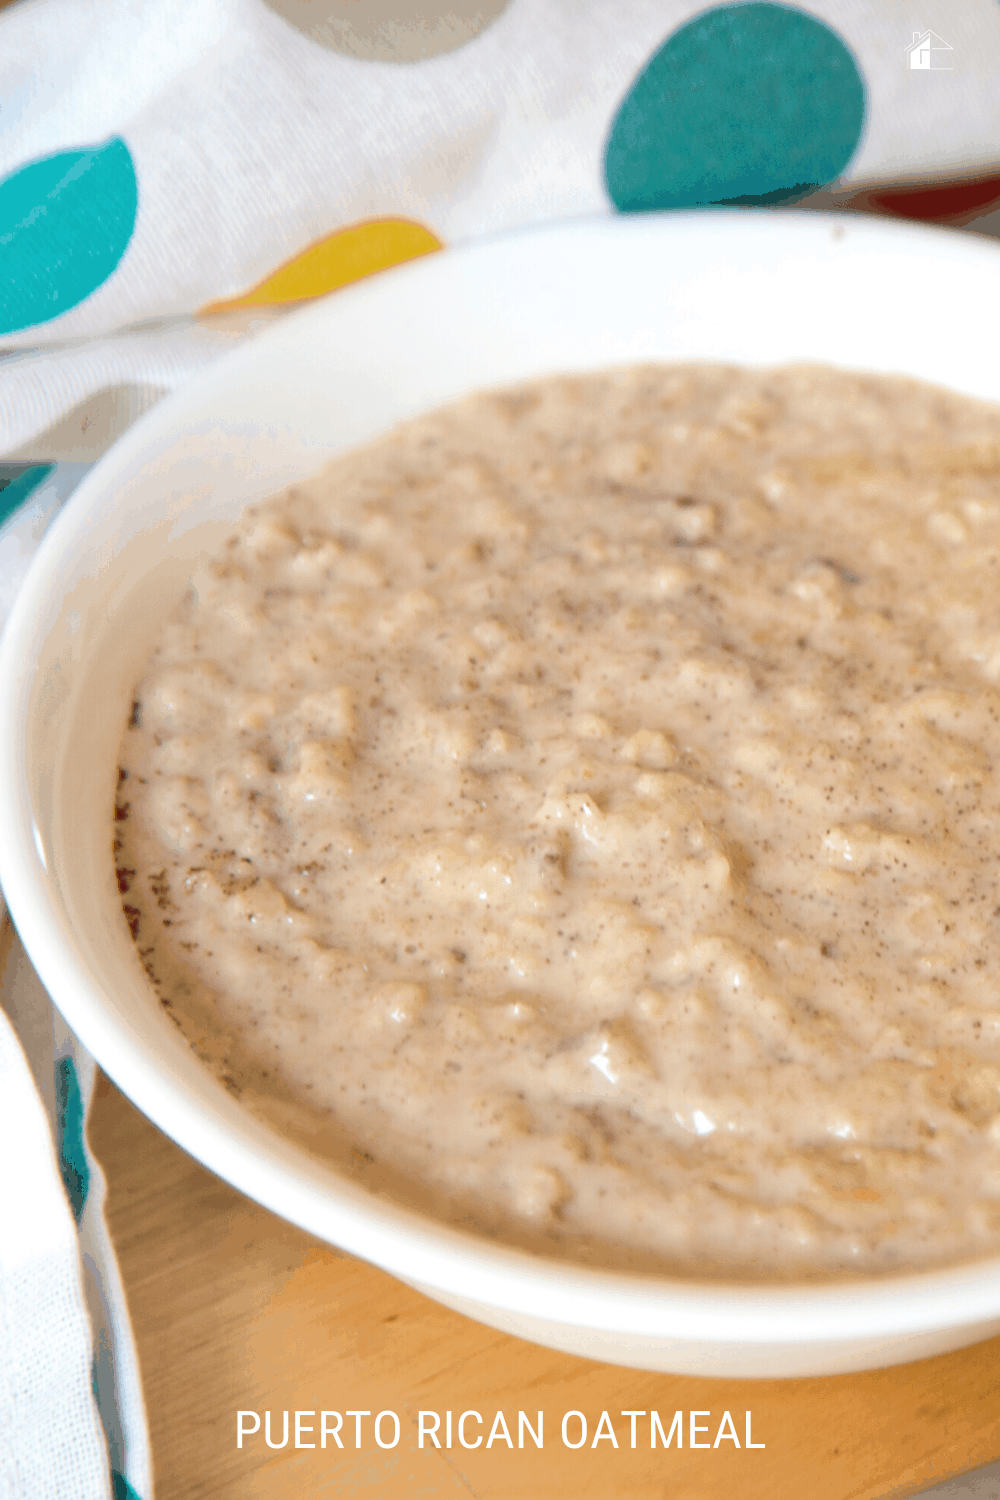 Nothing keeps me going in the mornings than a delicious Puerto Rican breakfast and Café Bustelo. Learn how to make Puerto Rican Oatmeal when you click here! #PuertoRicanFood #PuertoRicanRecipes via @mystayathome